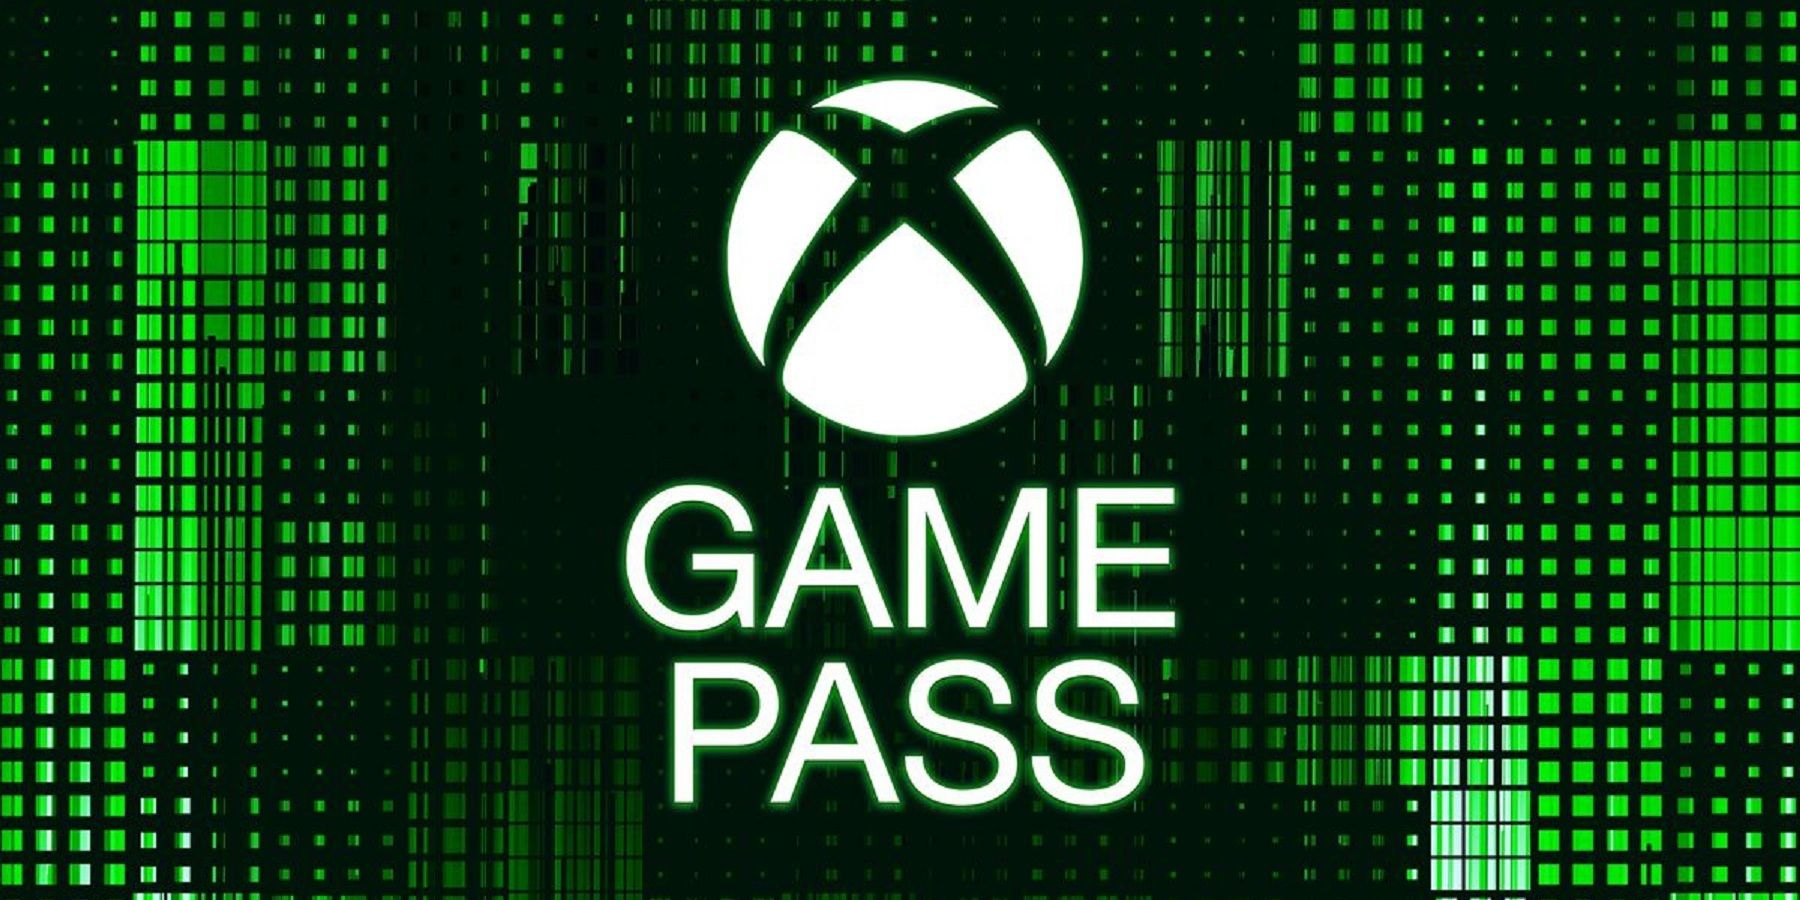 Xbox Game Pass For PC Getting Rebranded, Adding Four New Day One